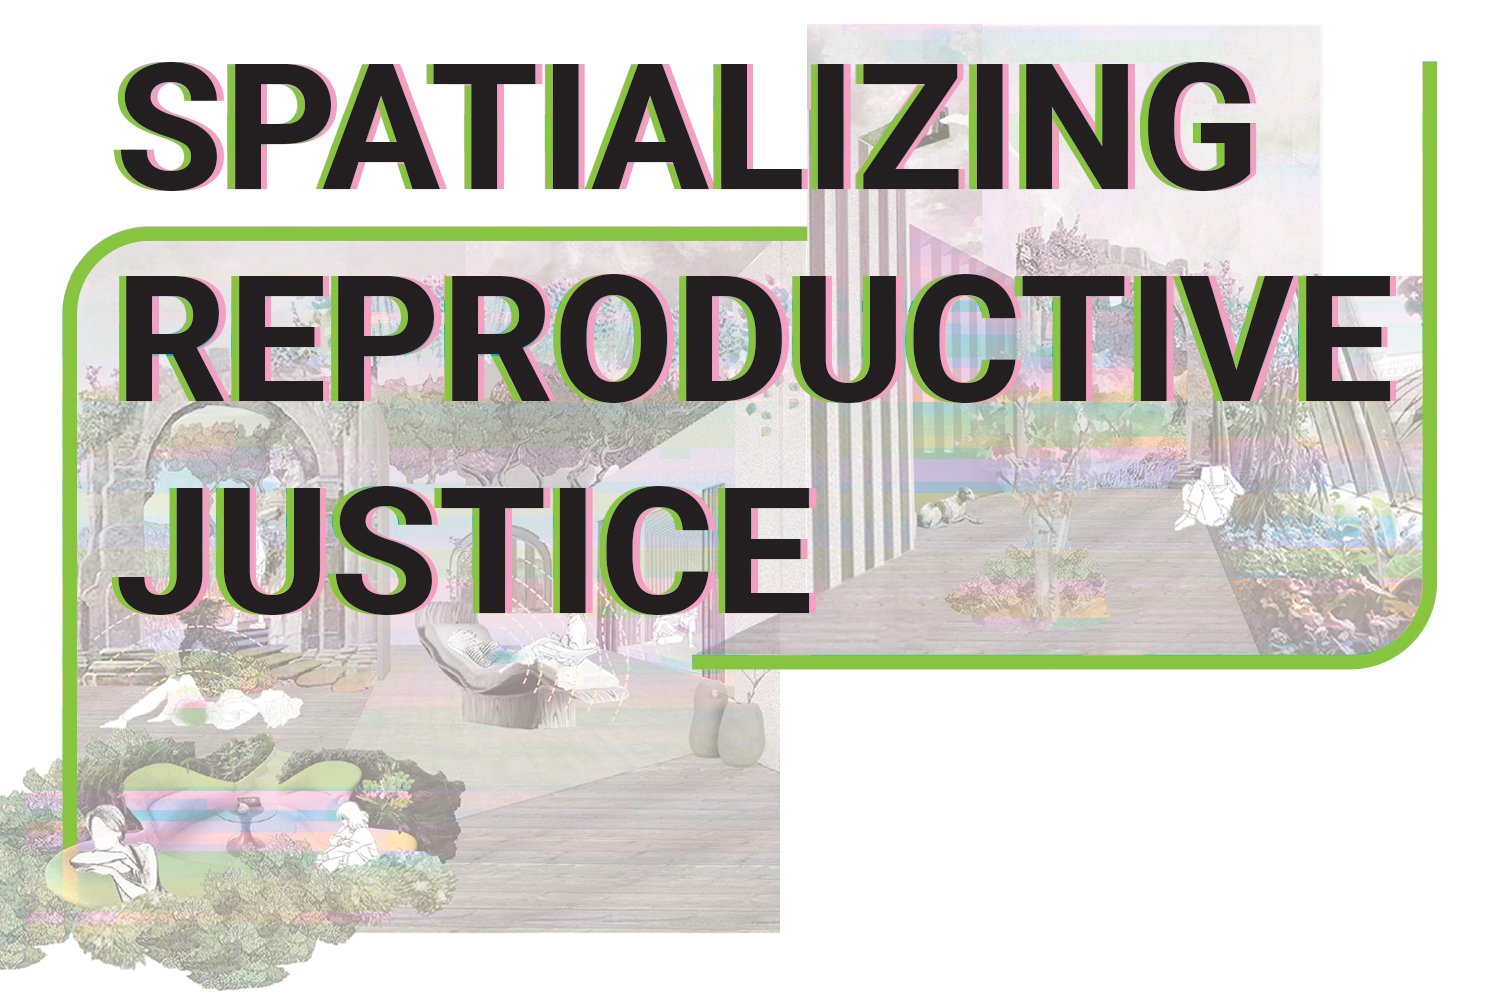 Spatializing Reproductive Justice promotional image